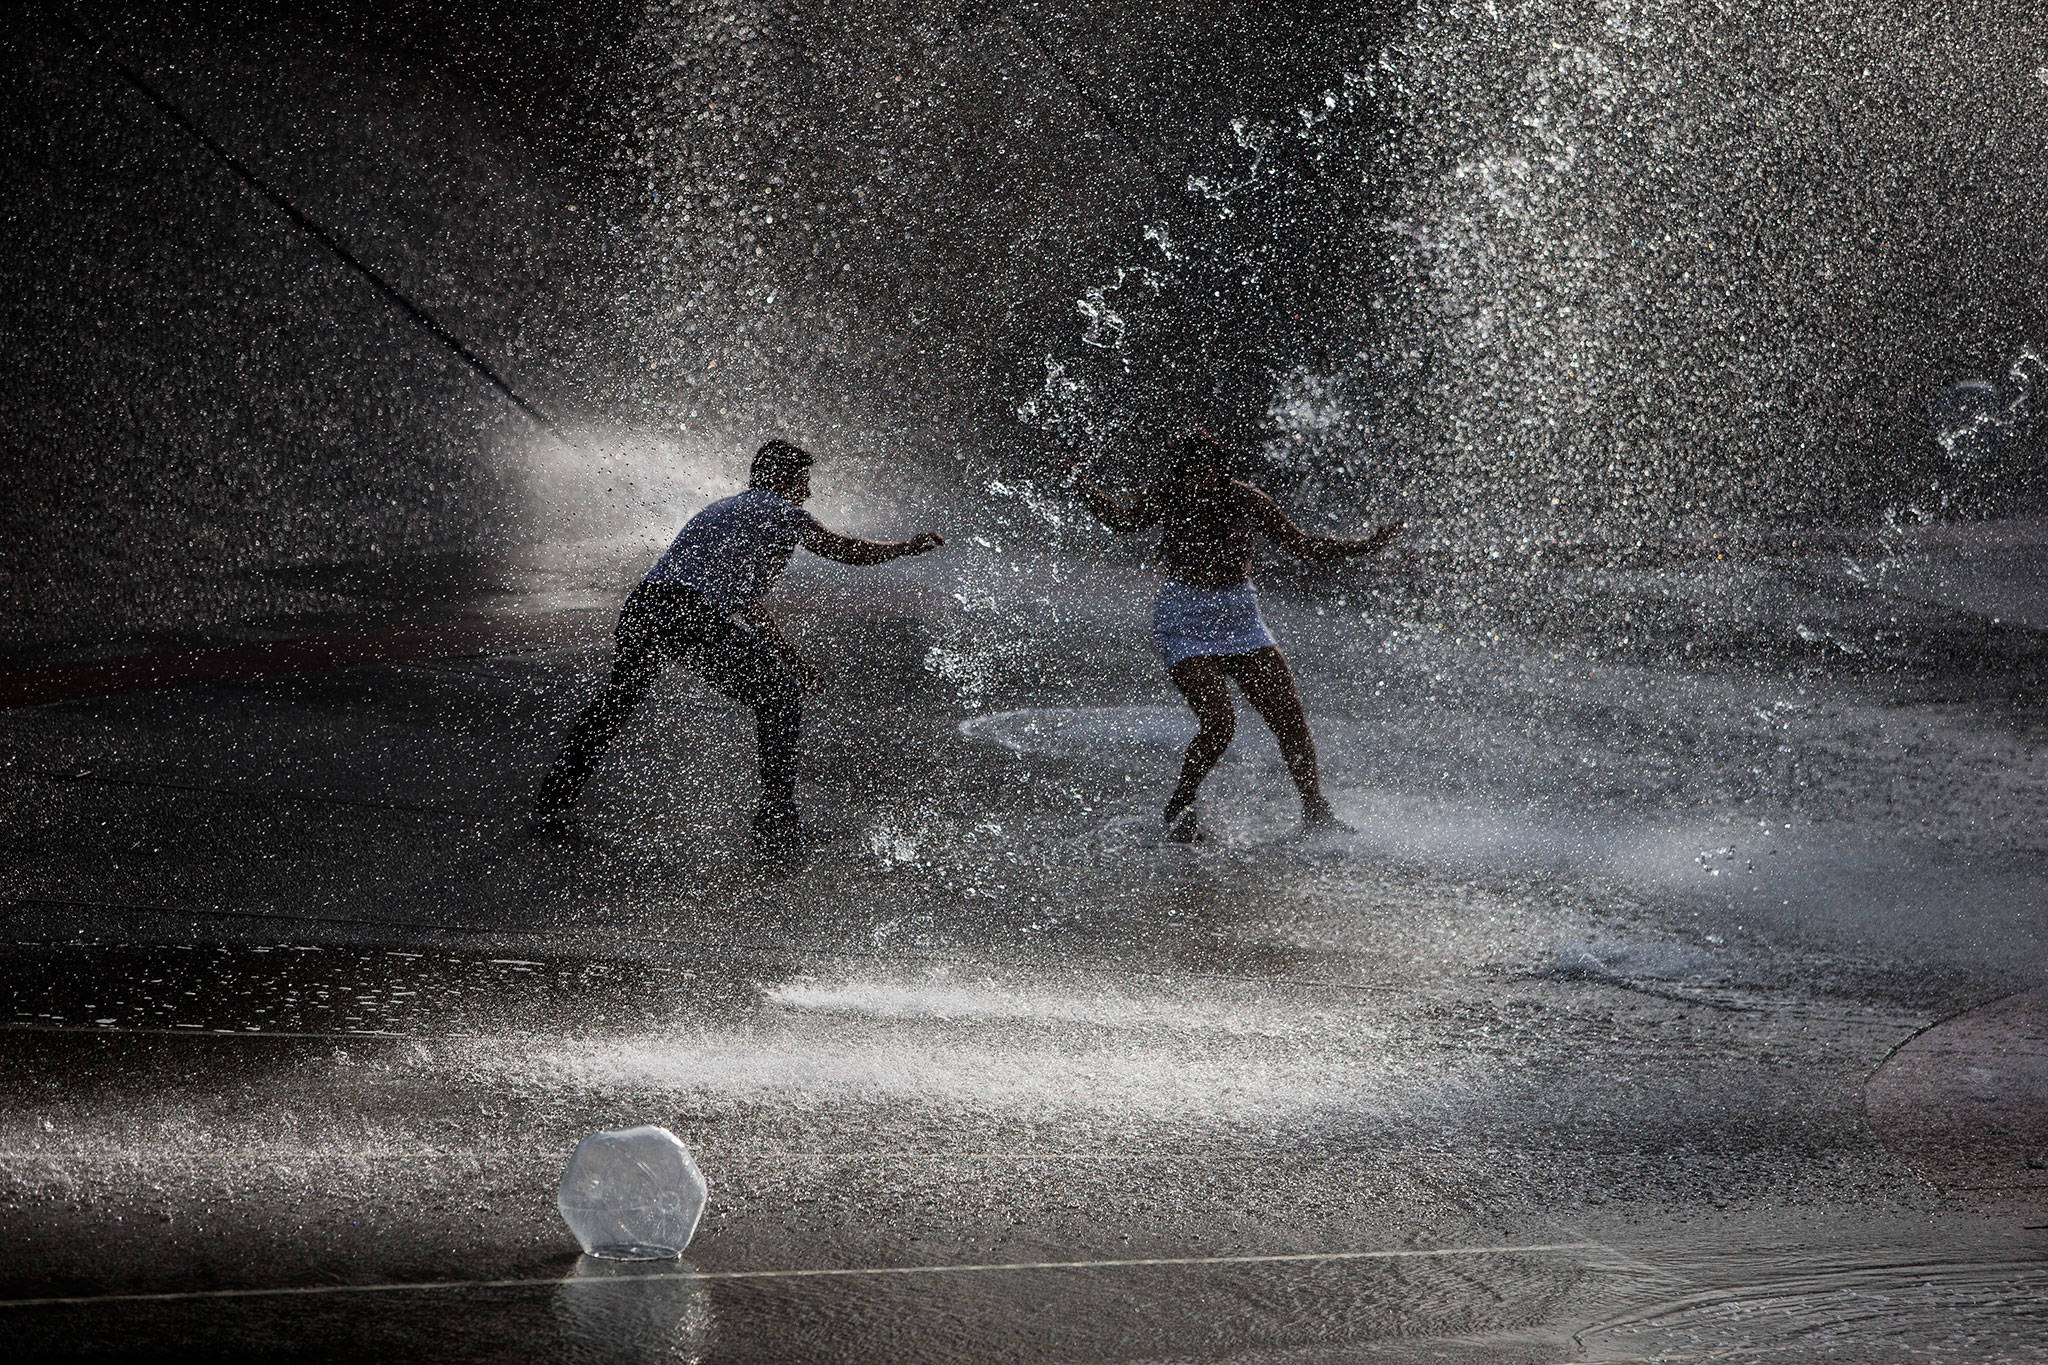 People play in the Seattle Center fountain during Bumbershoot Music & Arts Festival on Friday, Aug. 30, 2019 in Seattle, Wash. (Olivia Vanni / The Herald)